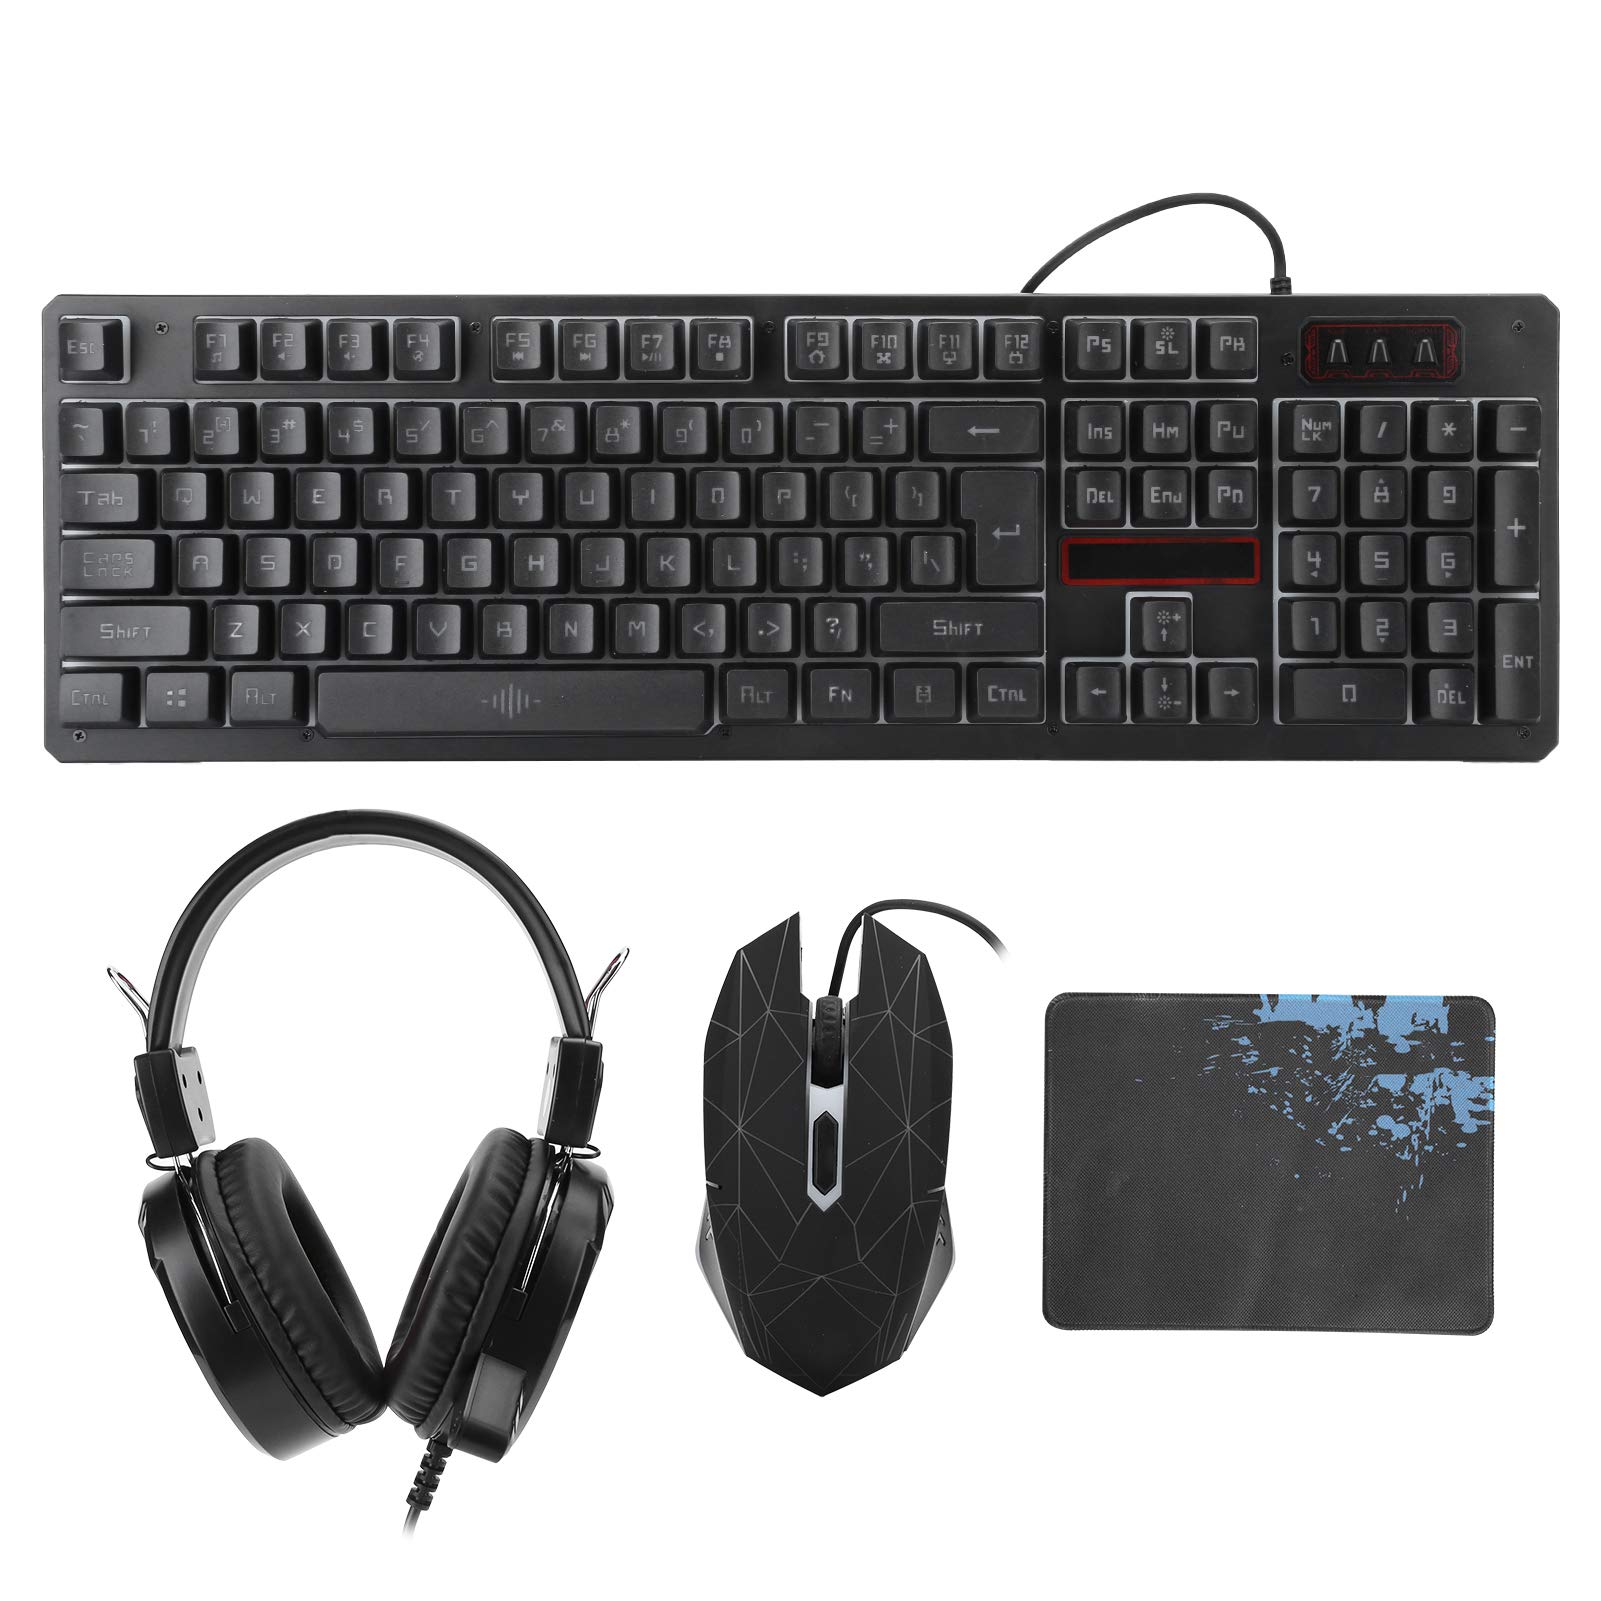 Gaming Keyboard Mouse and Headset Combo, RGB Backlight USB Wired Keyboard Mouse Headset Set, Gaming Keyboard Mouse Set, for Laptop Notebook Computer (schwarz)